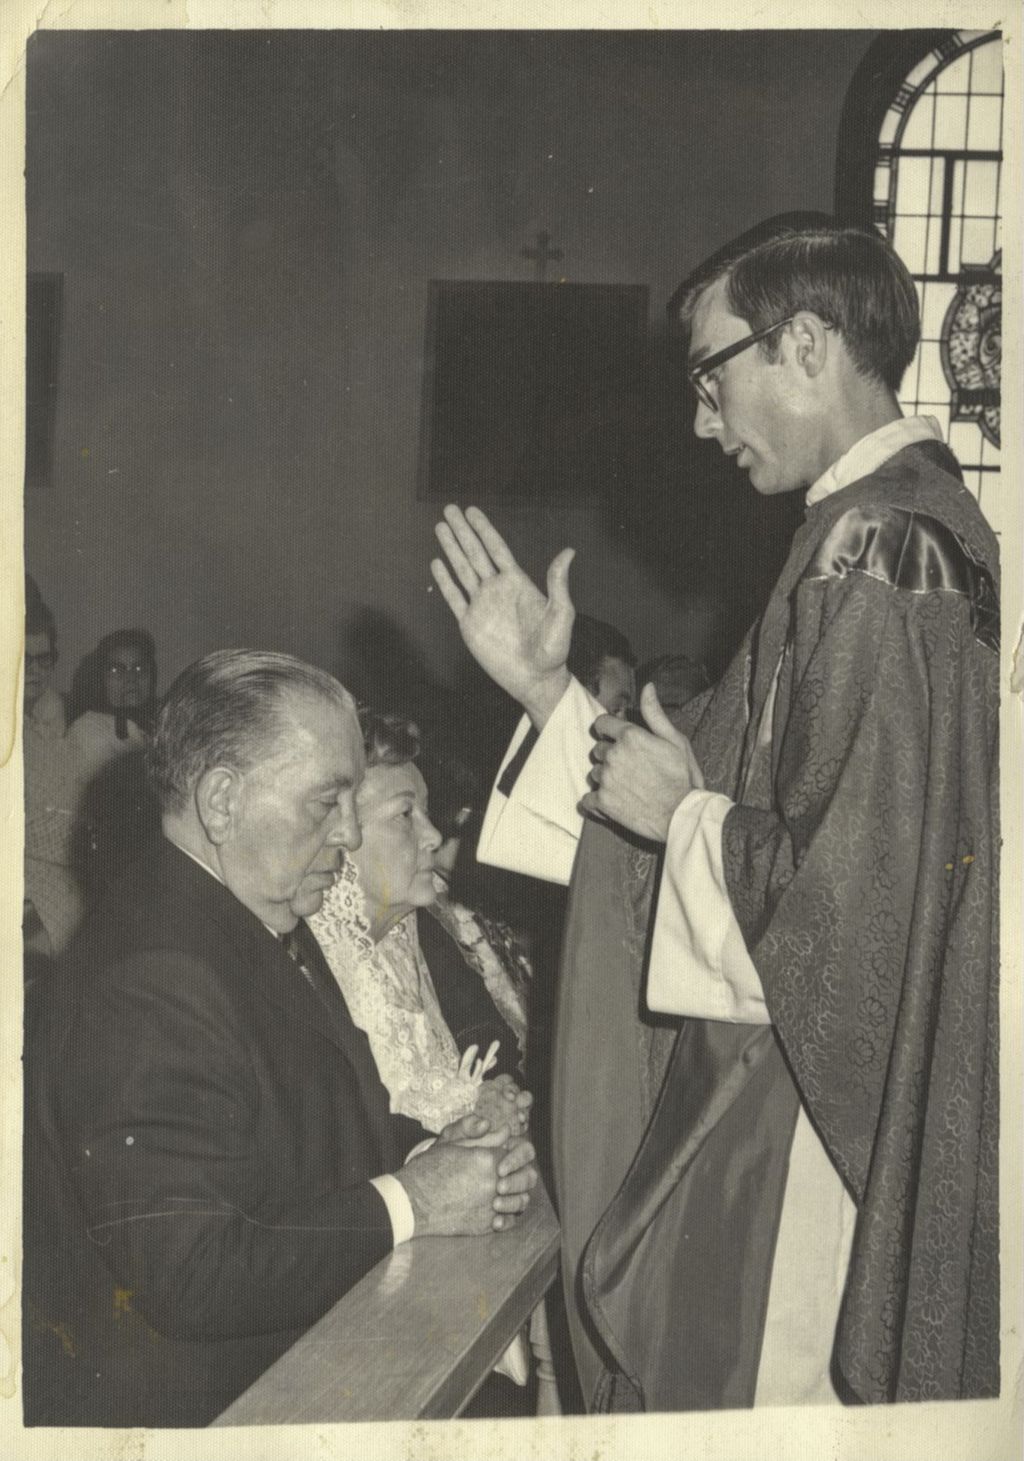 Richard J. and Eleanor Daley receive a blessing from a priest